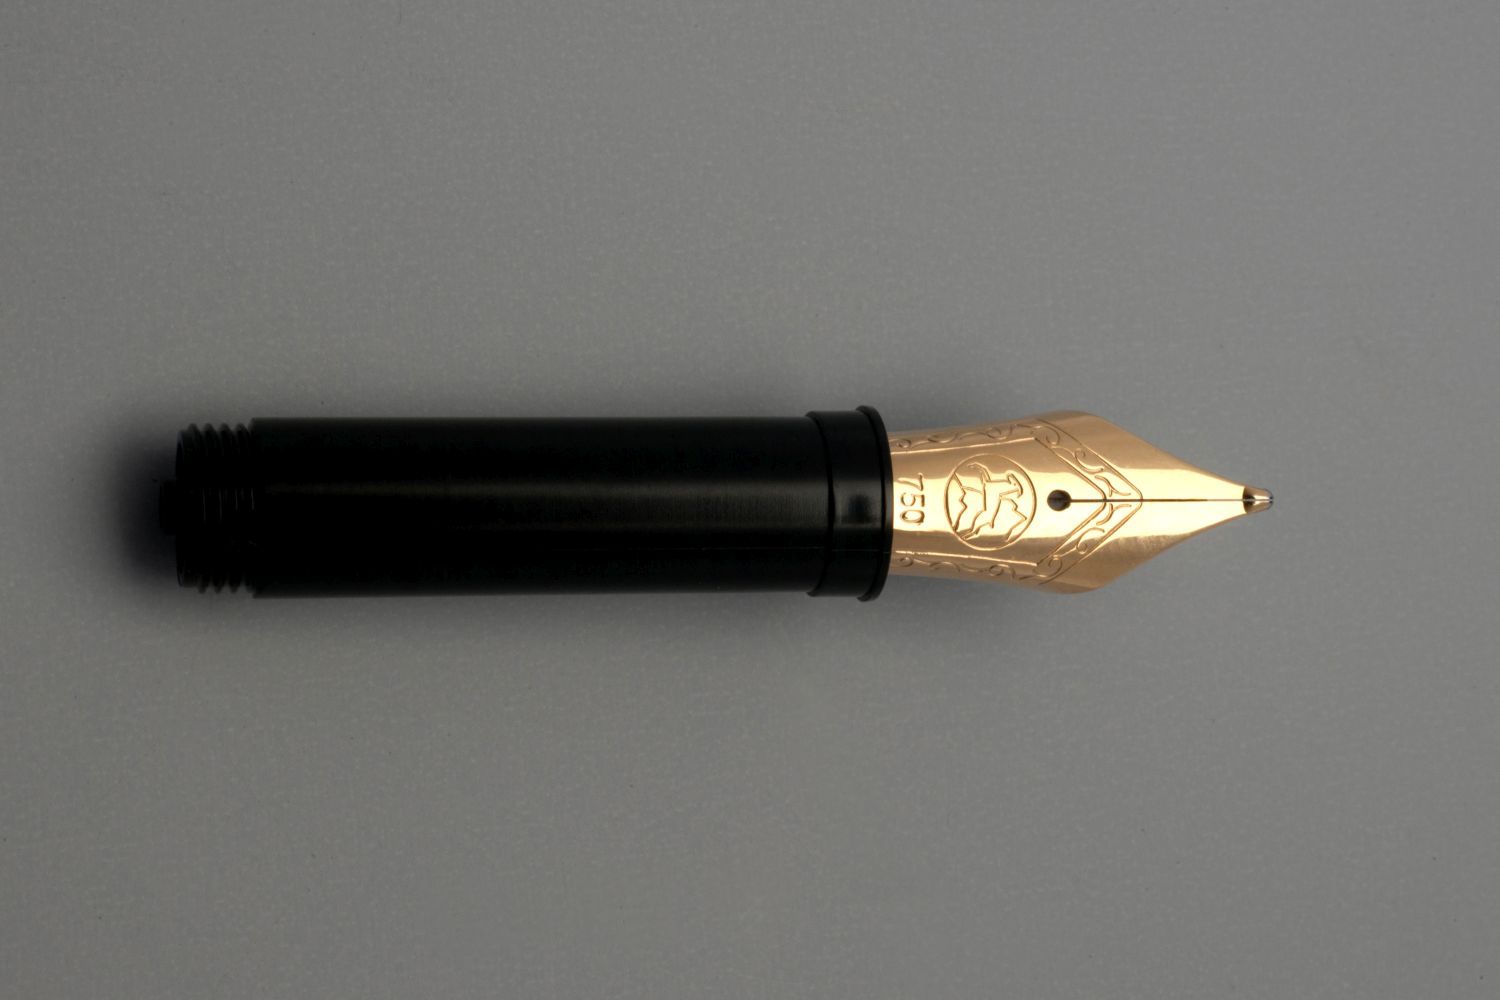 Small nib, including an ink-feed system